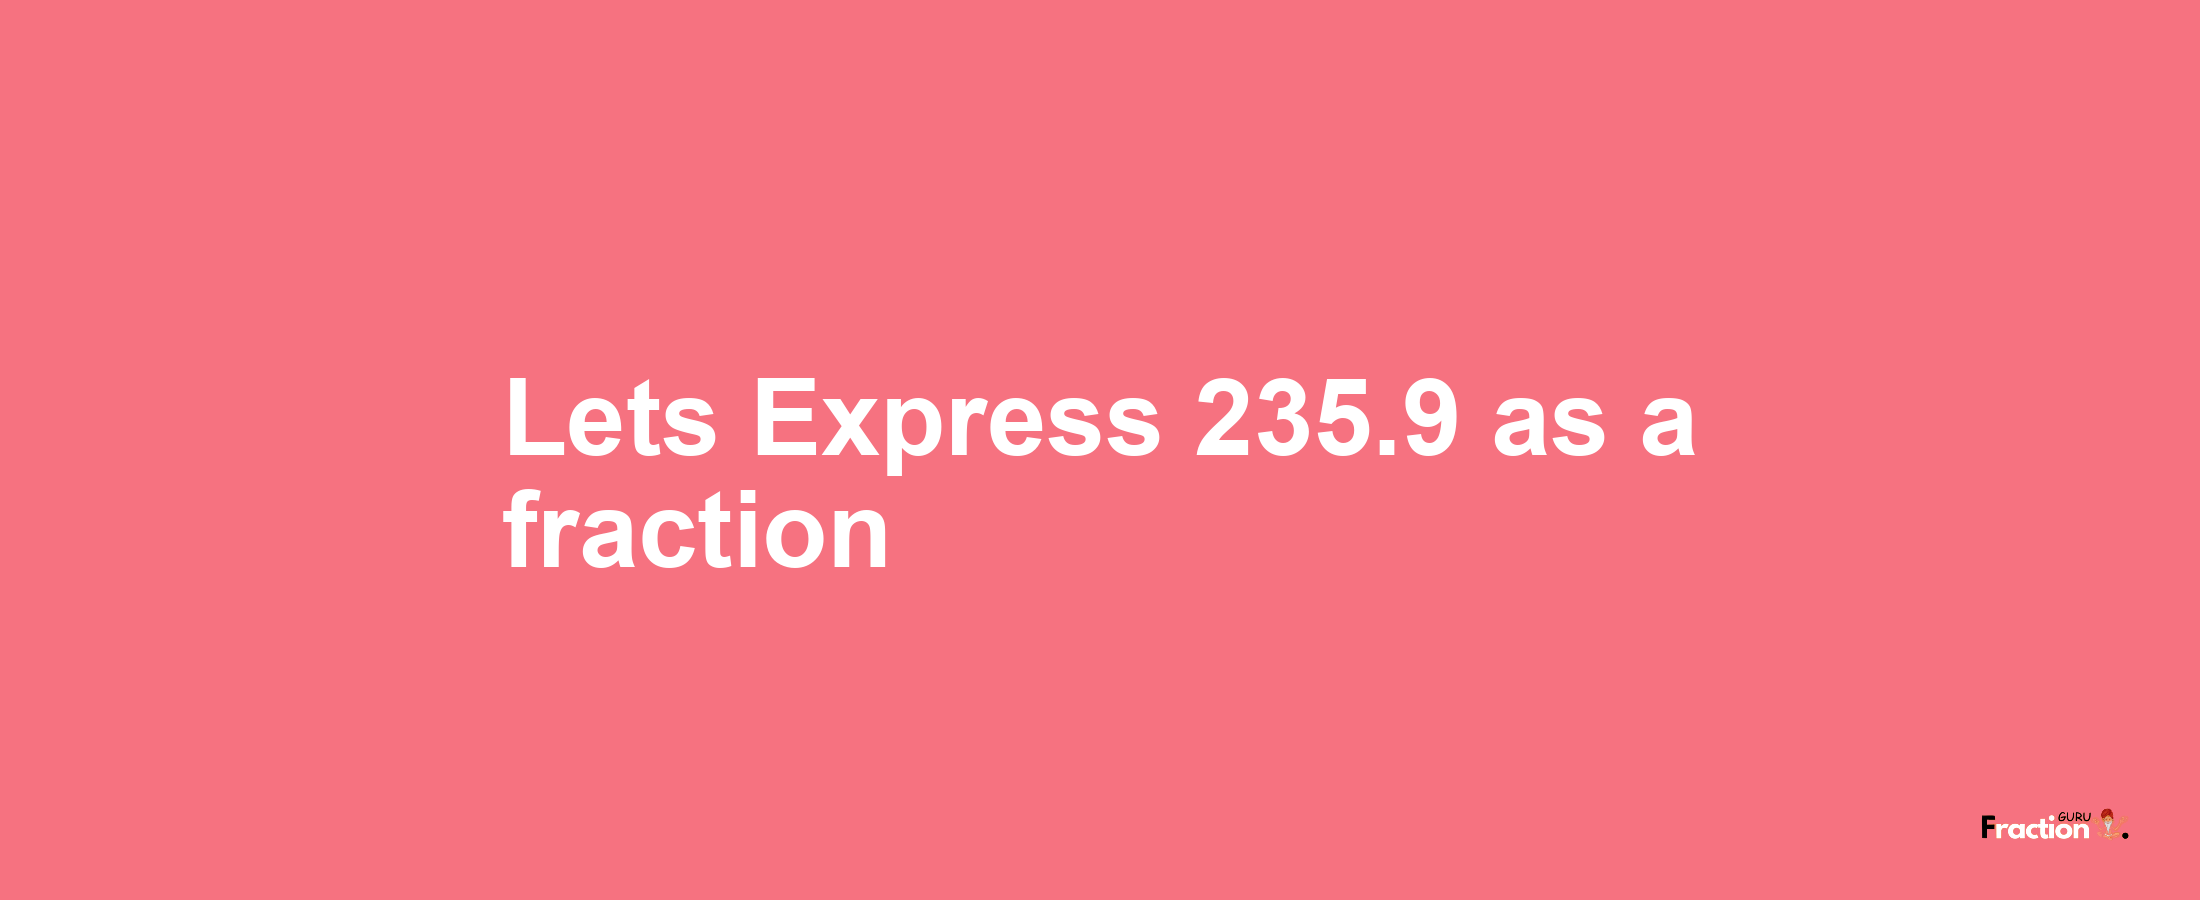 Lets Express 235.9 as afraction